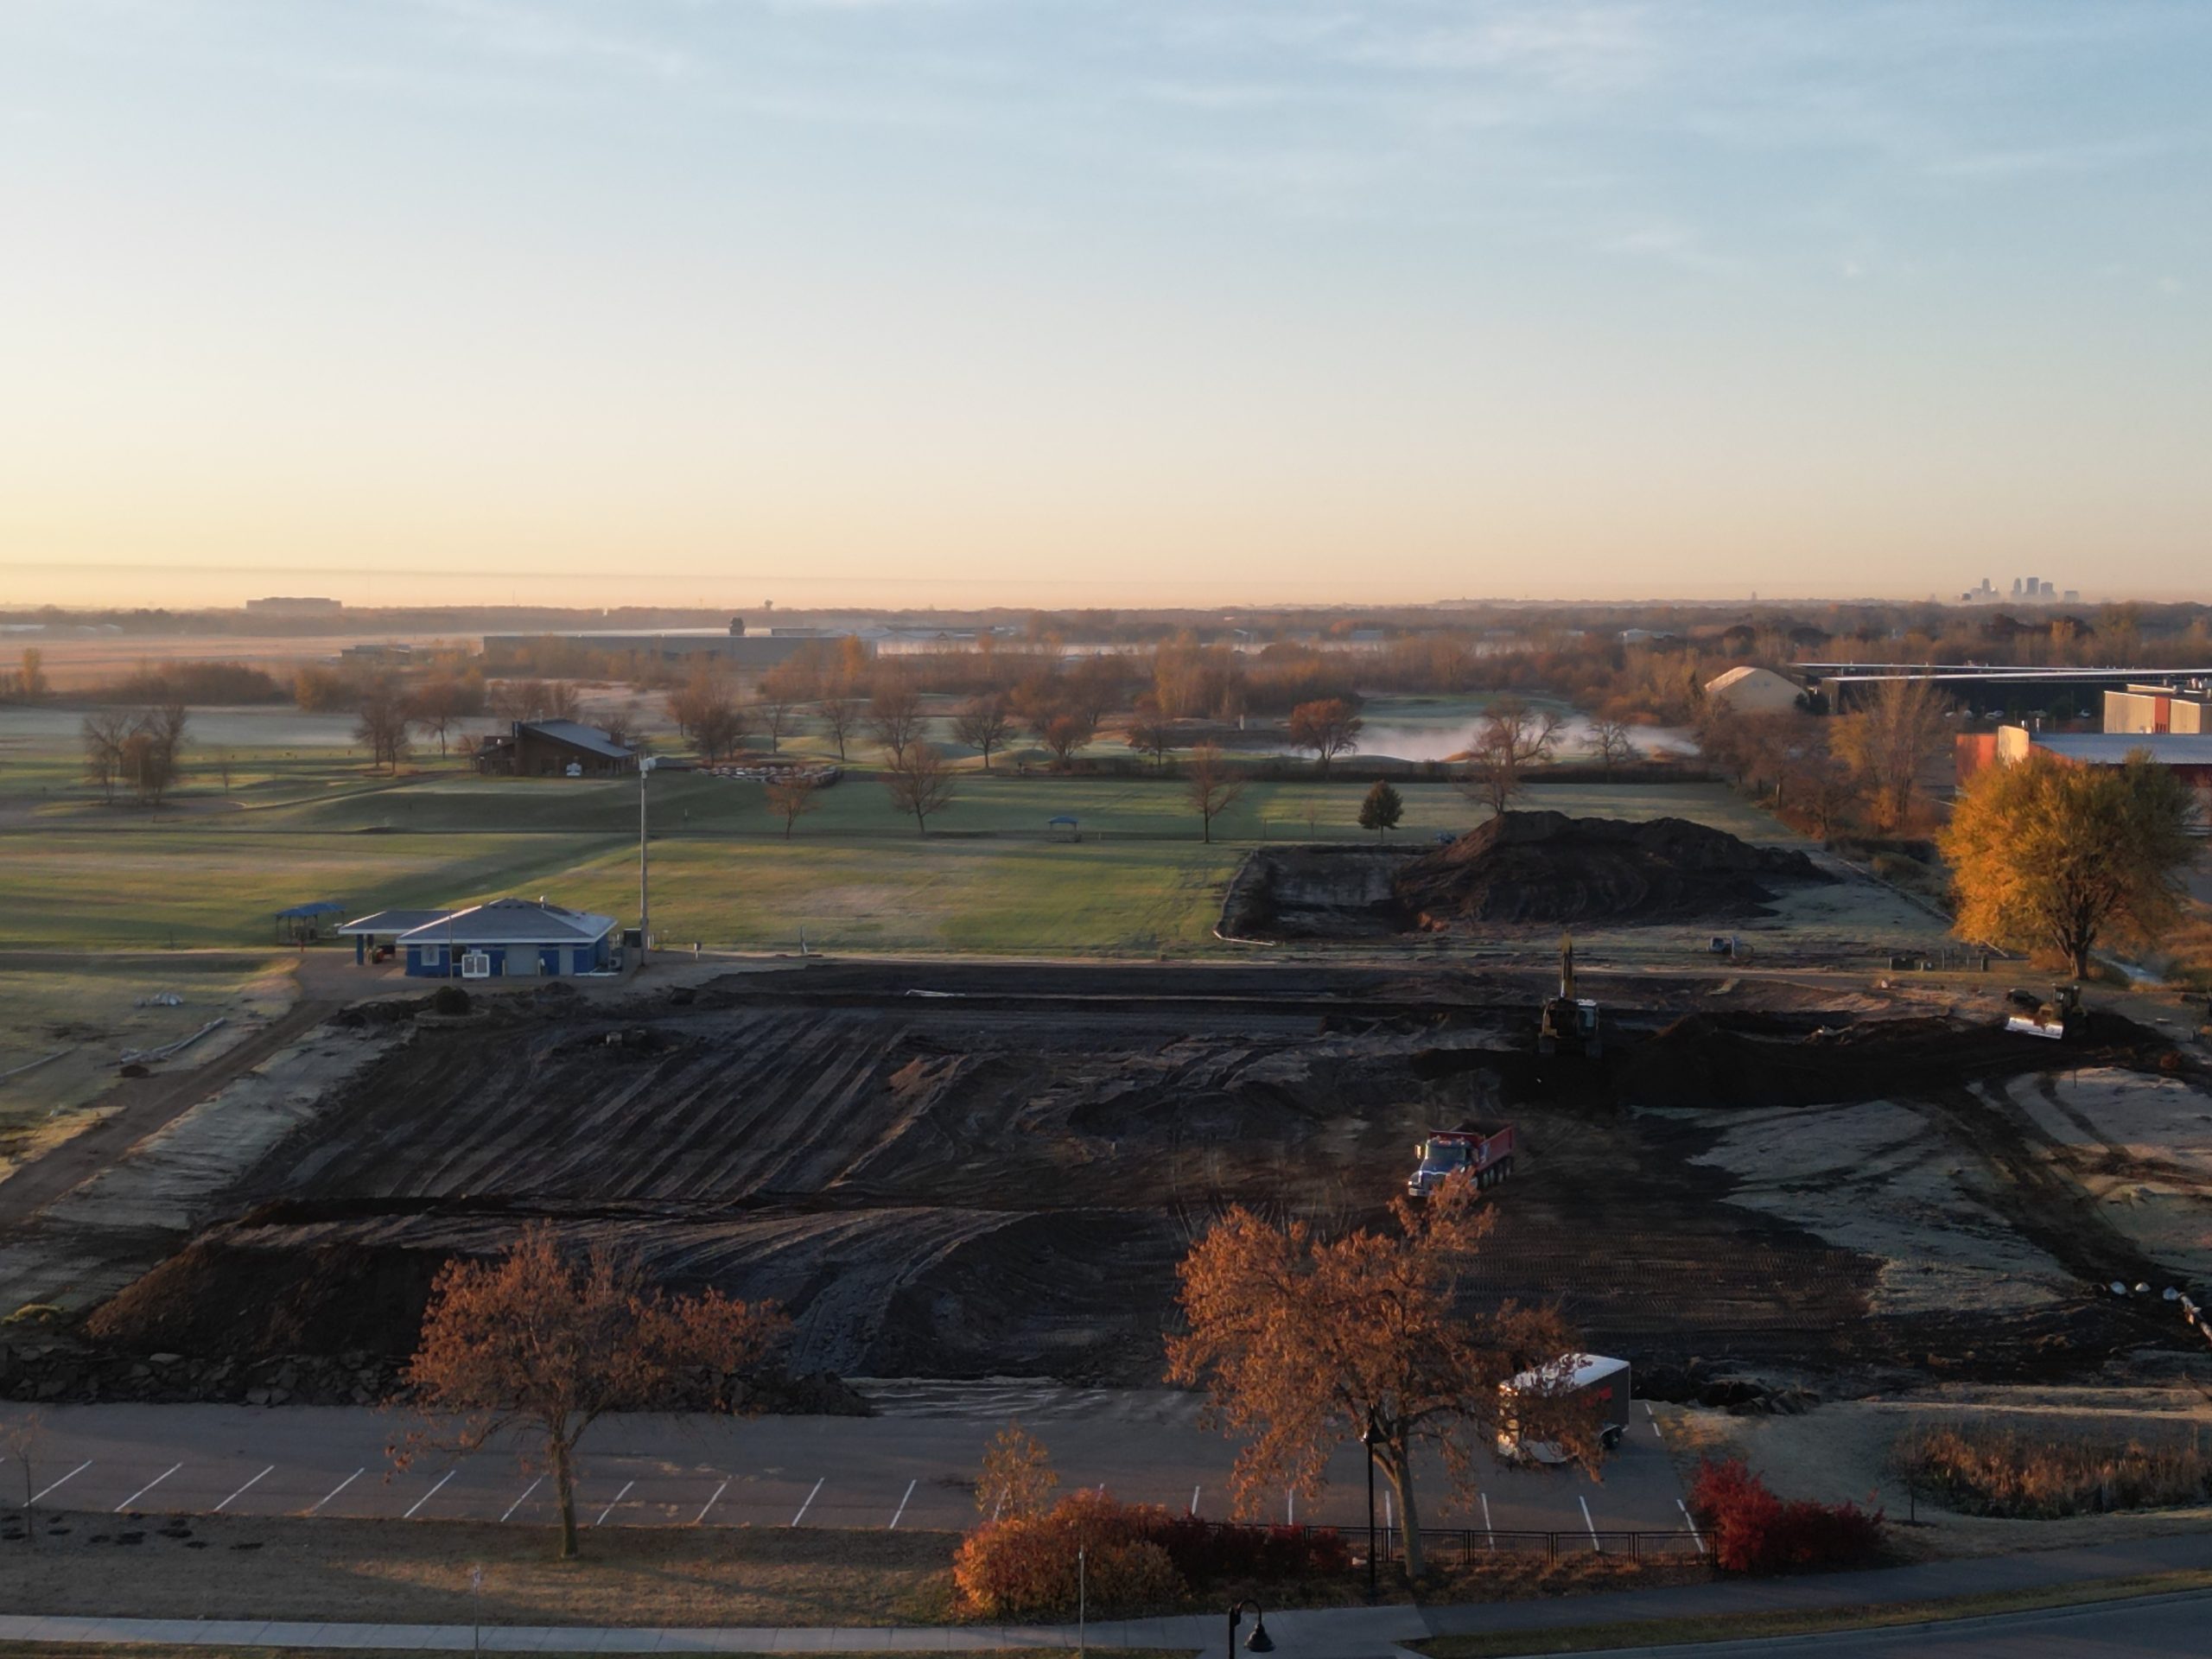 Drone shot of construction on new fields at sunrise, with piles of dirt and no grass